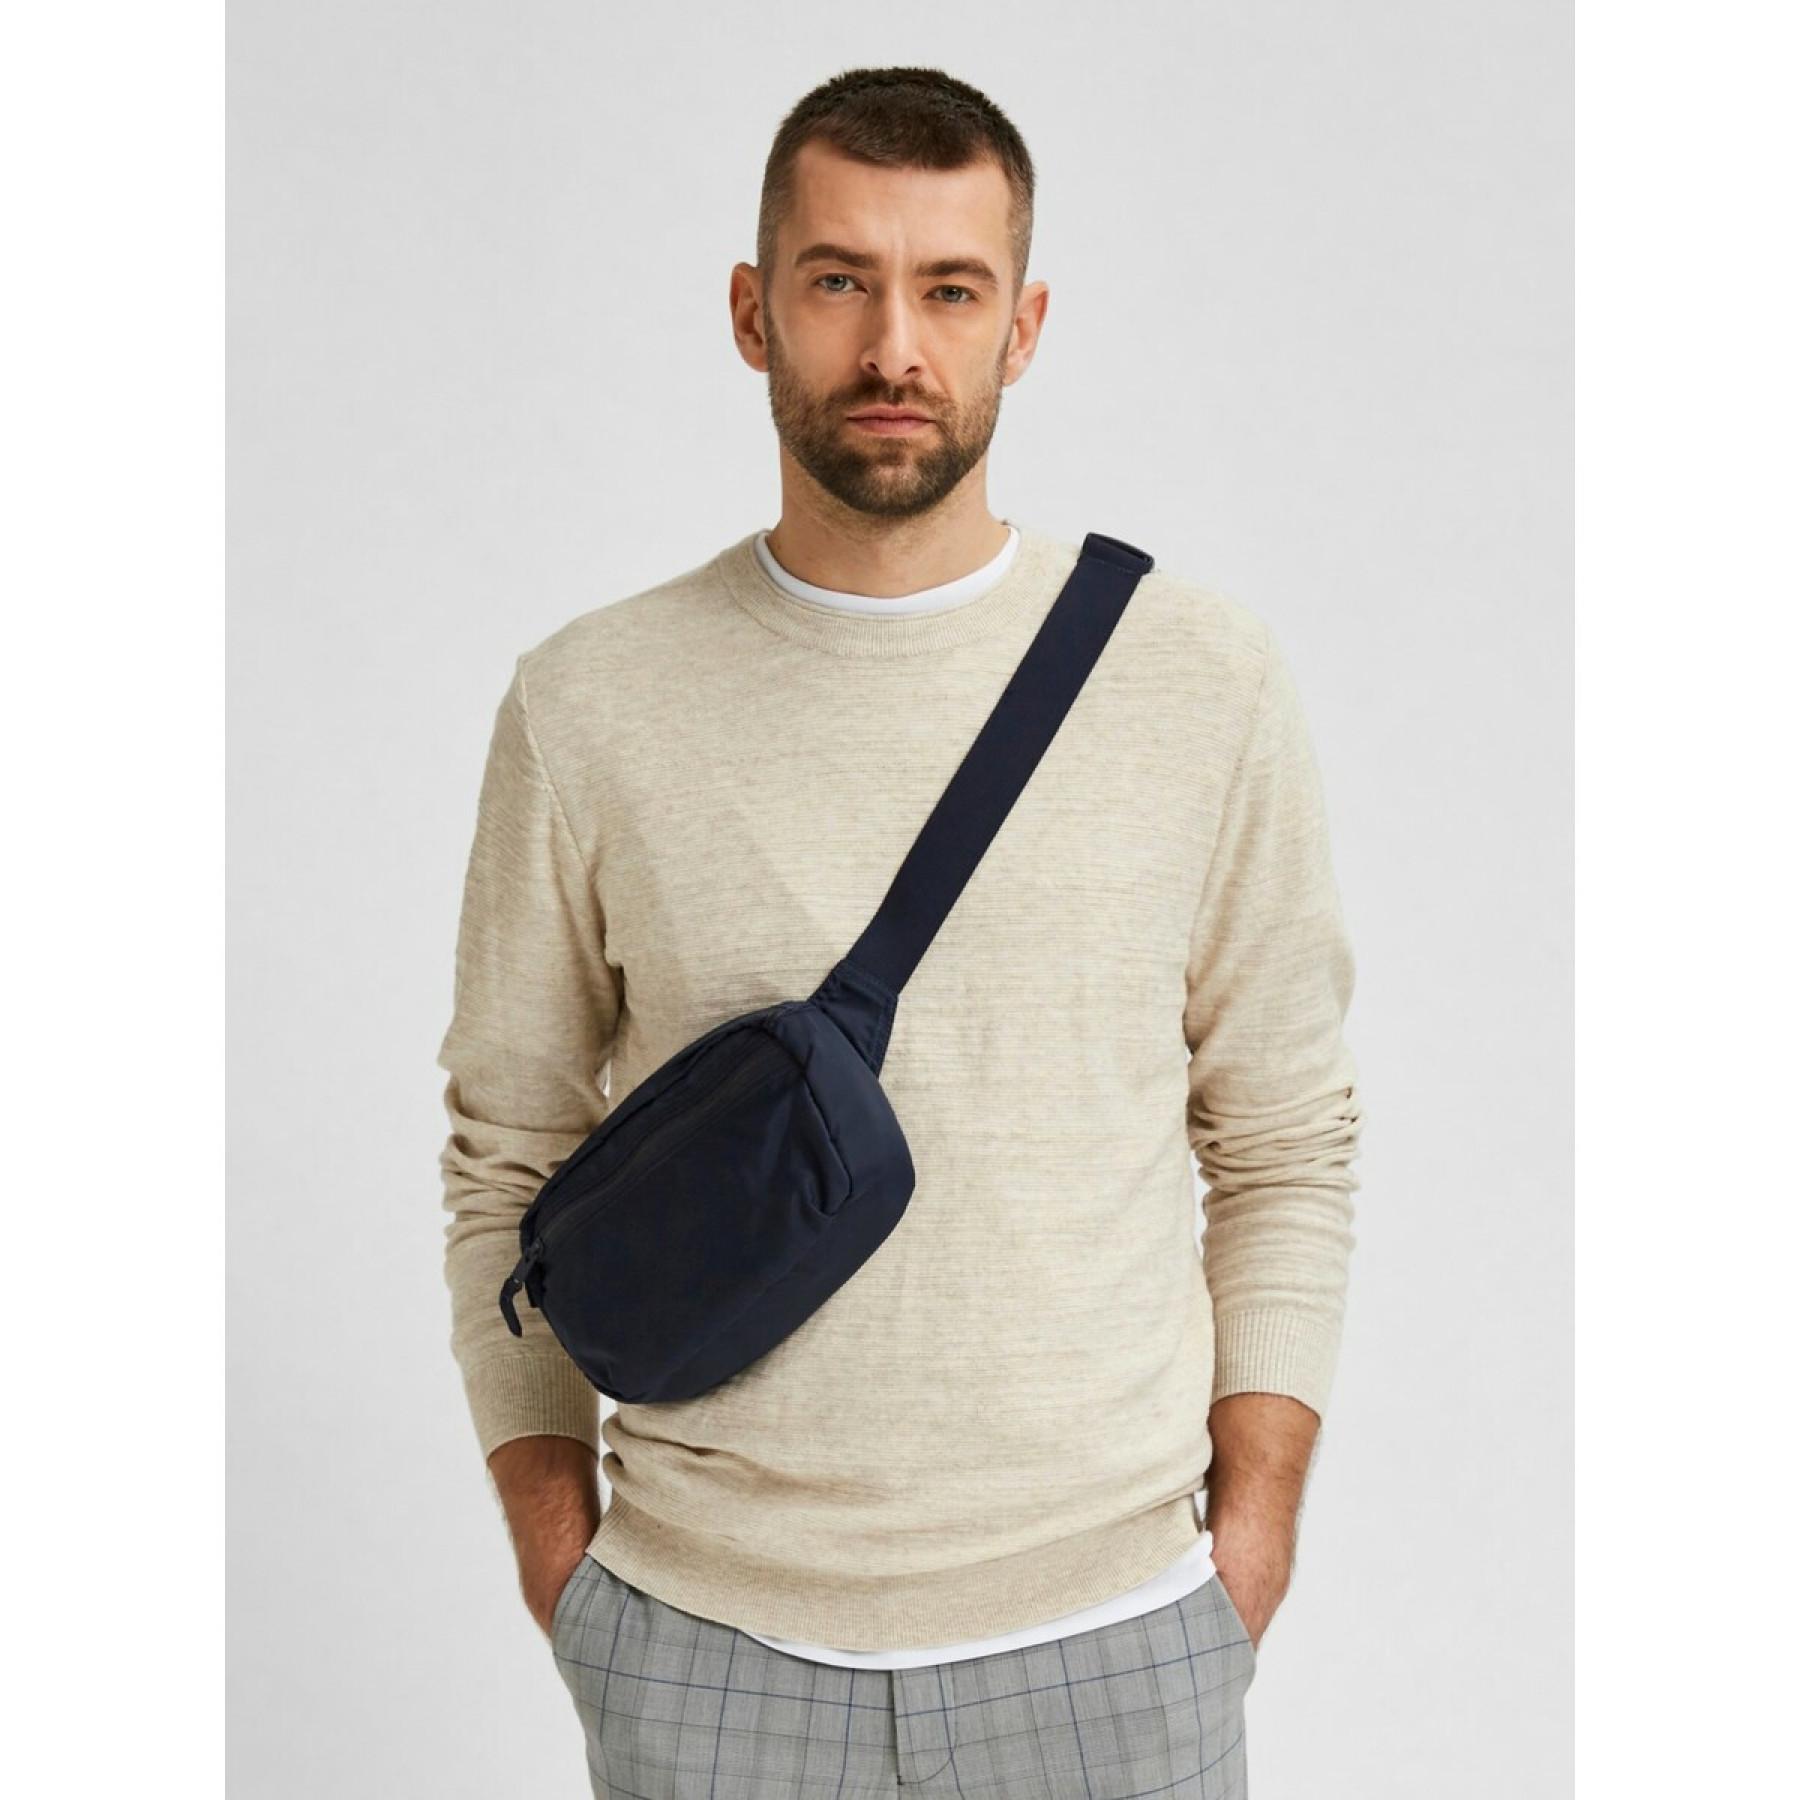 Sweater Selected Buddy col rond